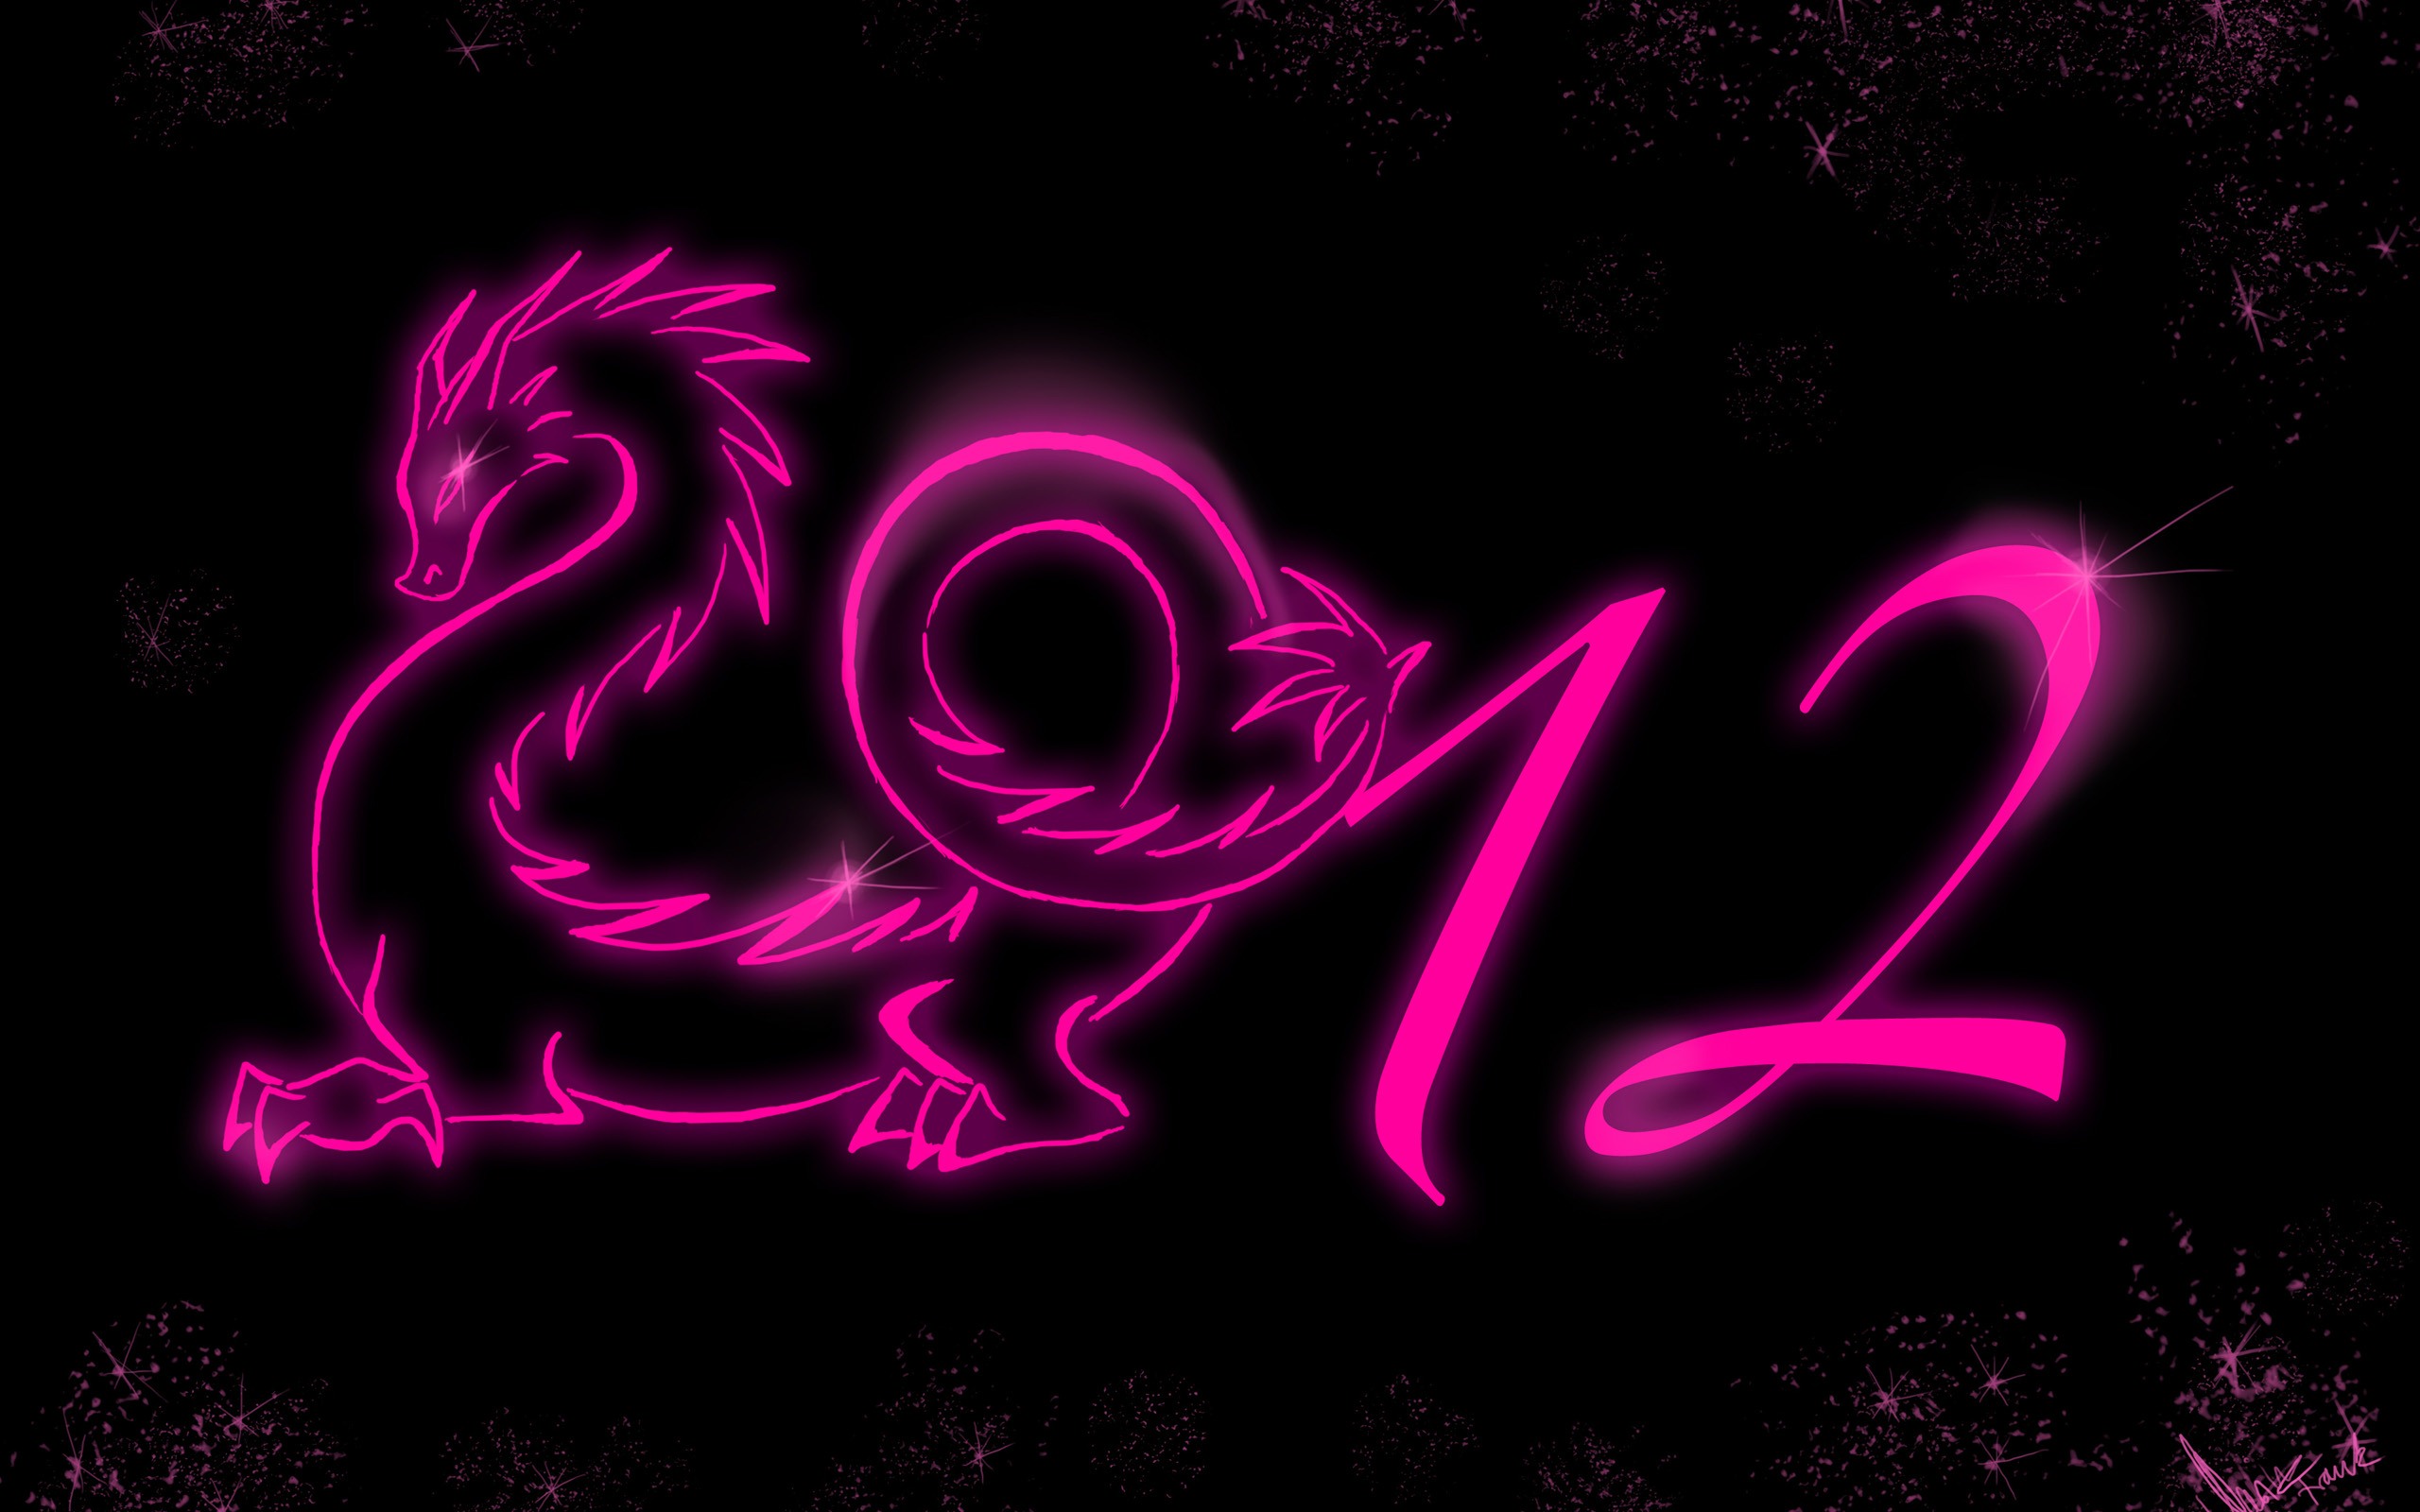 2012 New Year wallpapers (1) #16 - 2560x1600